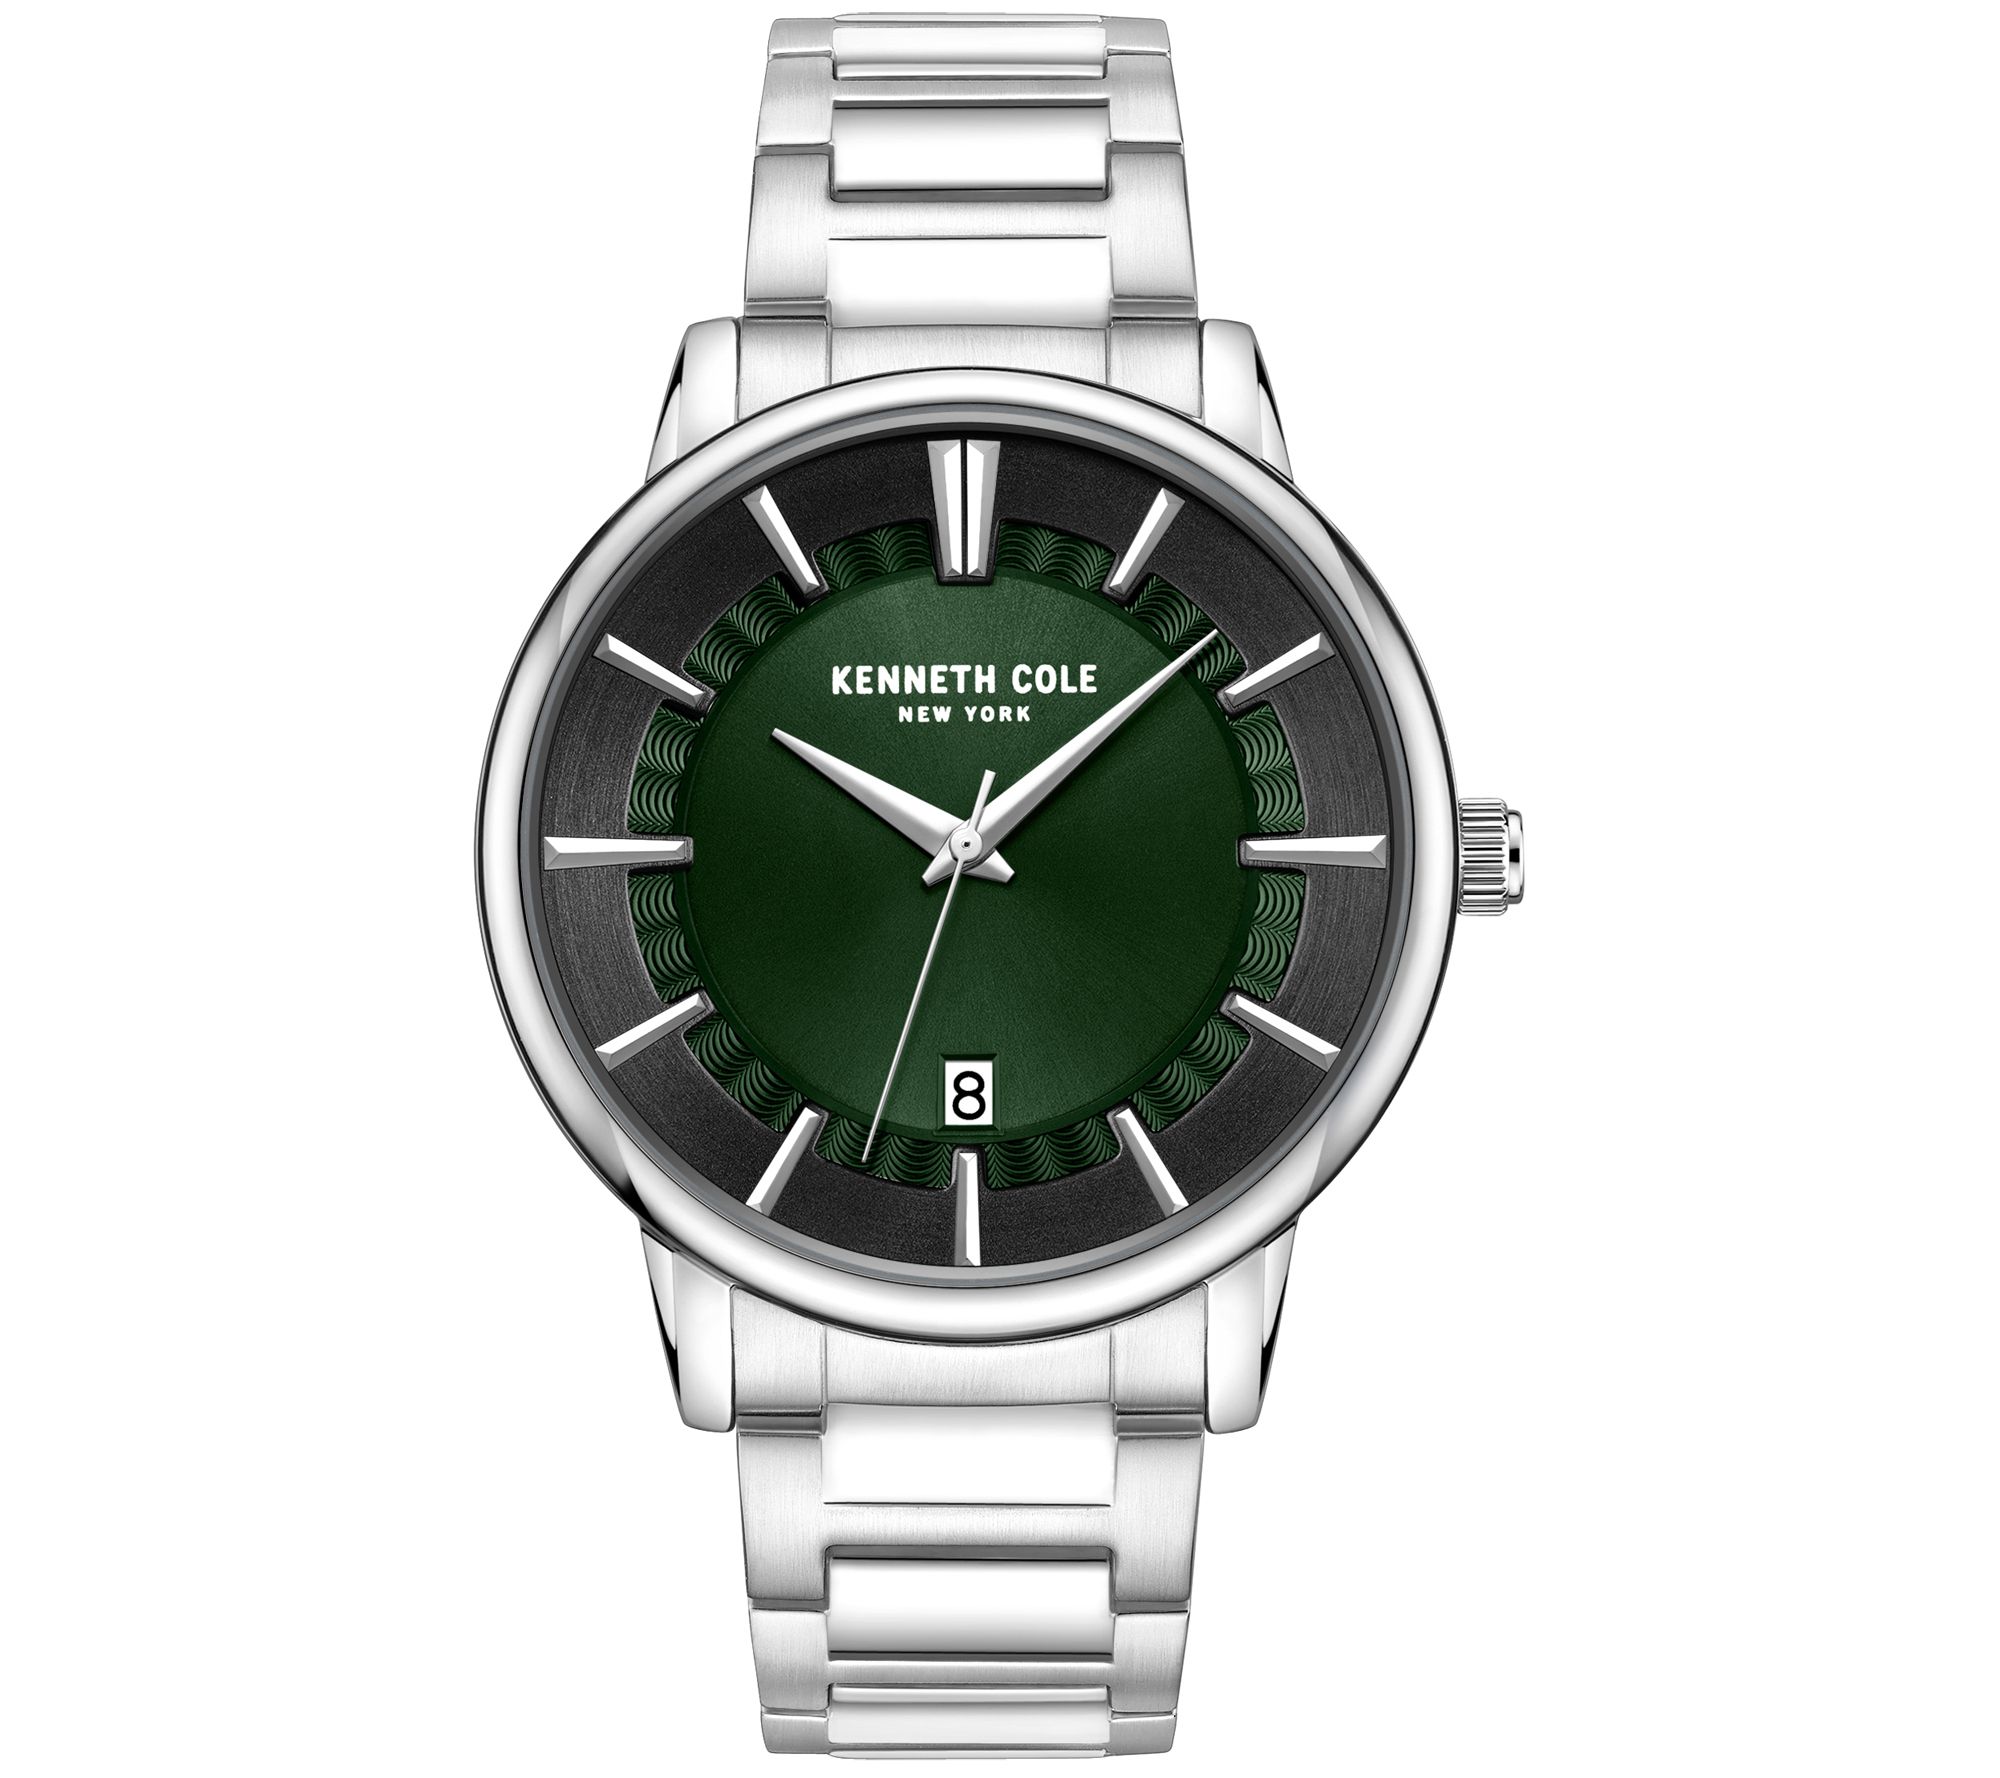 Kenneth Cole New York Men's Stainless Green Dial Watch - QVC.com